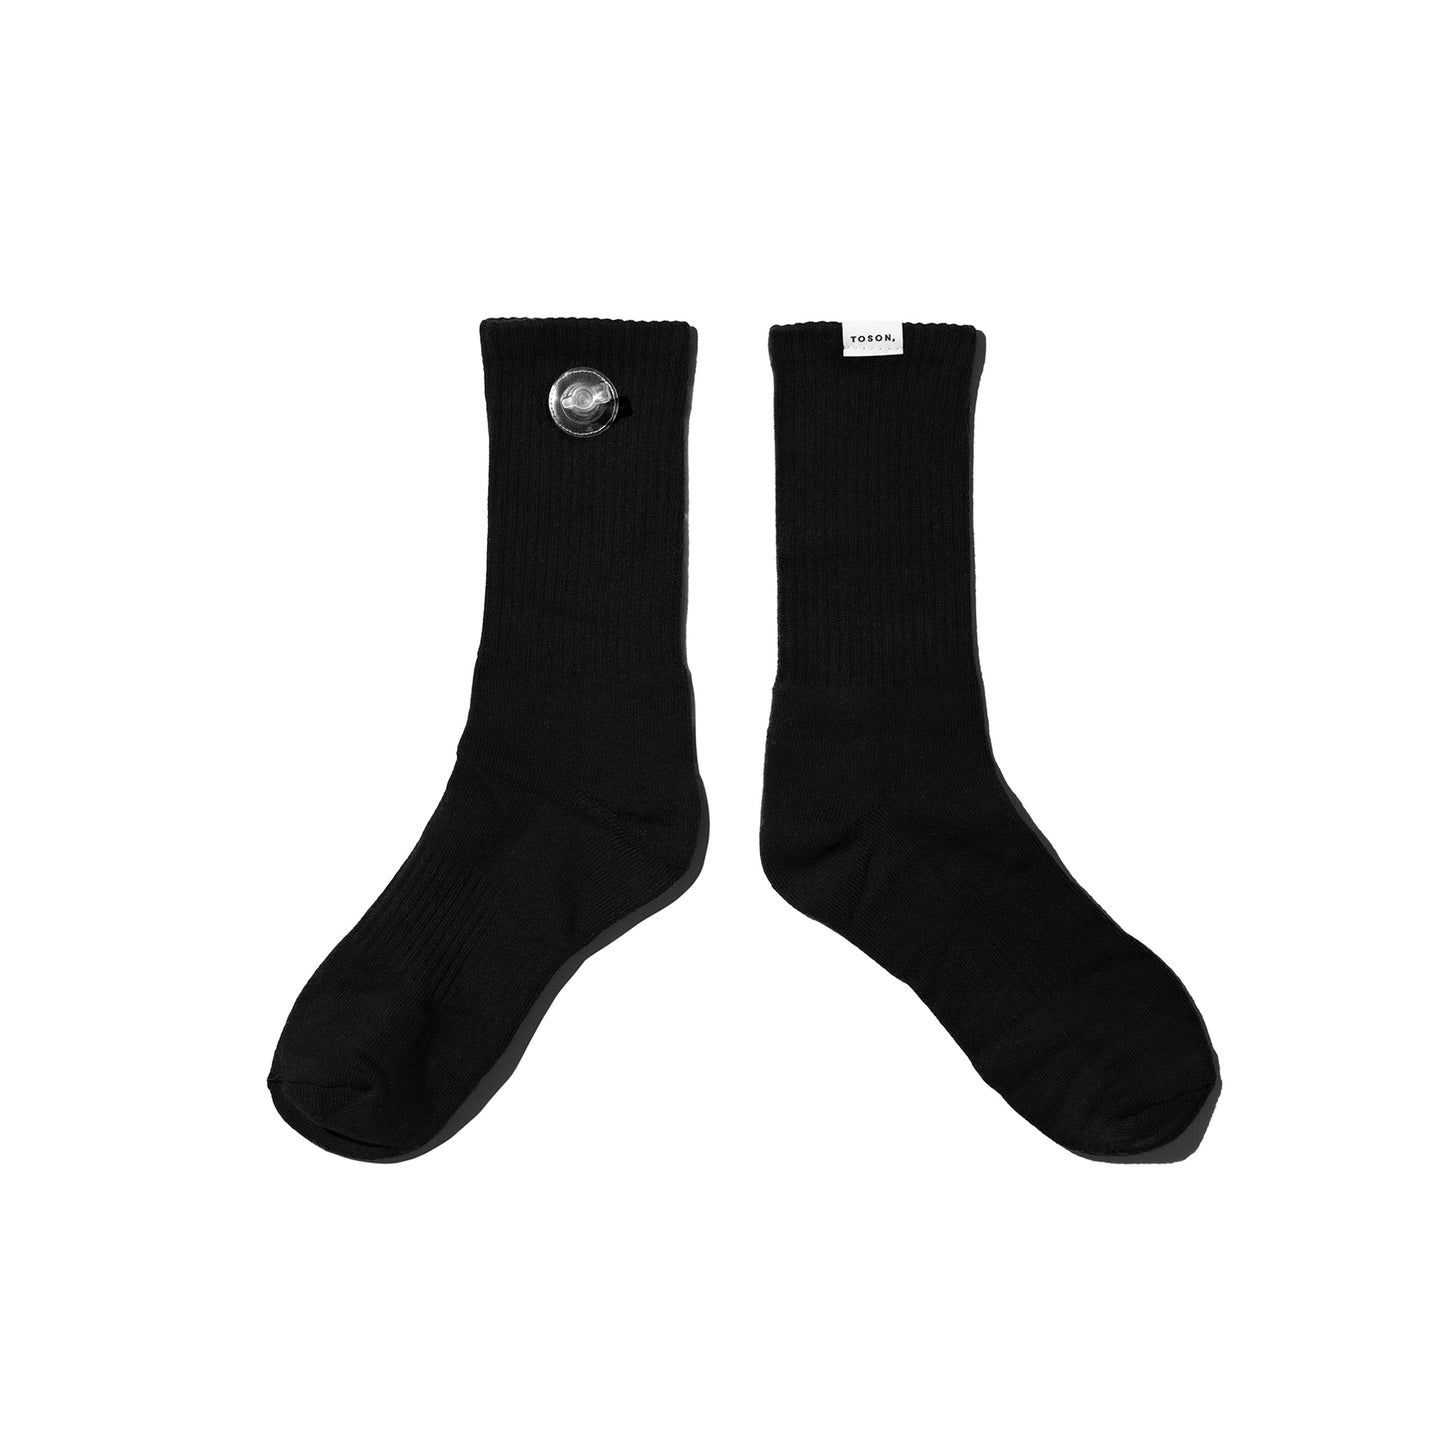 Toson, Inflatable Socks 2 Pack in Black + Army Green